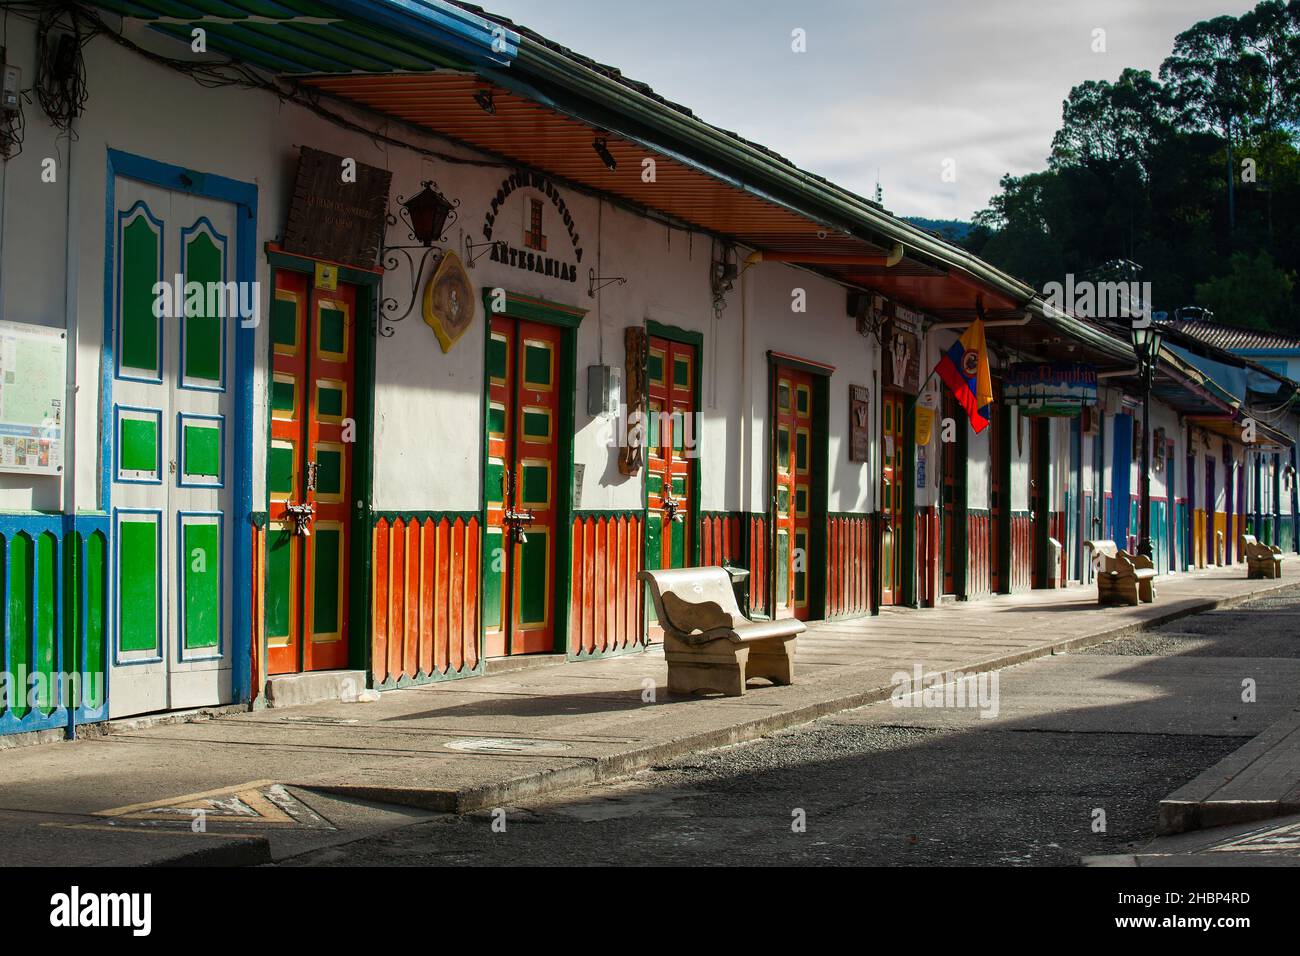 Salento Colombia July 2021 Beautiful Street And Facades Of The Houses Of The Small Town Of Salento Located At The Region Of Quindio In Colombia 2HBP4RD 